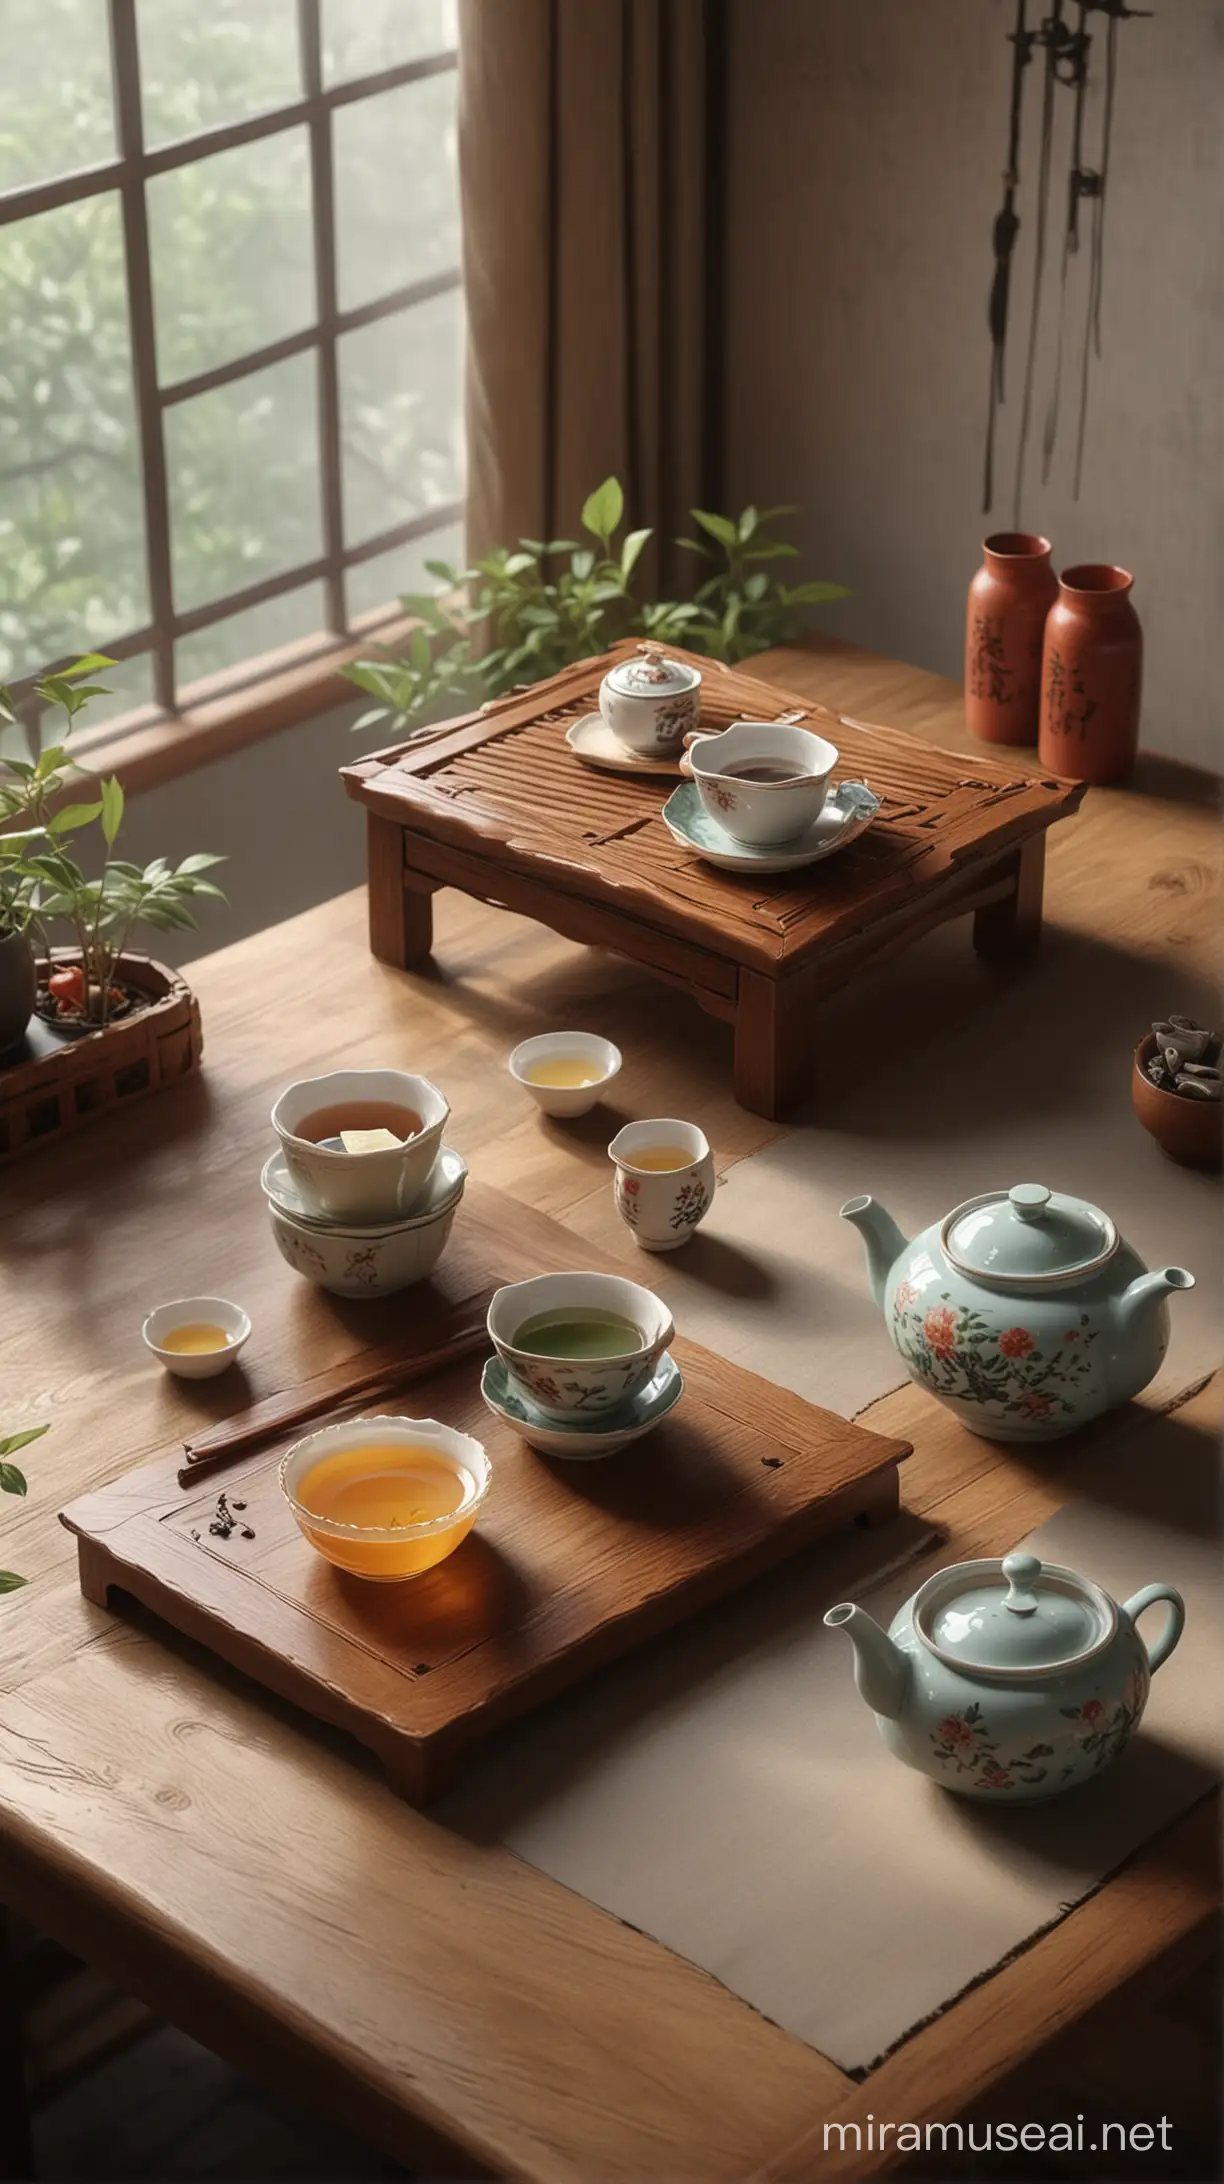 Chinese Tea Ceremony in a Rustic Study with Petcore and Cabincore Aesthetics